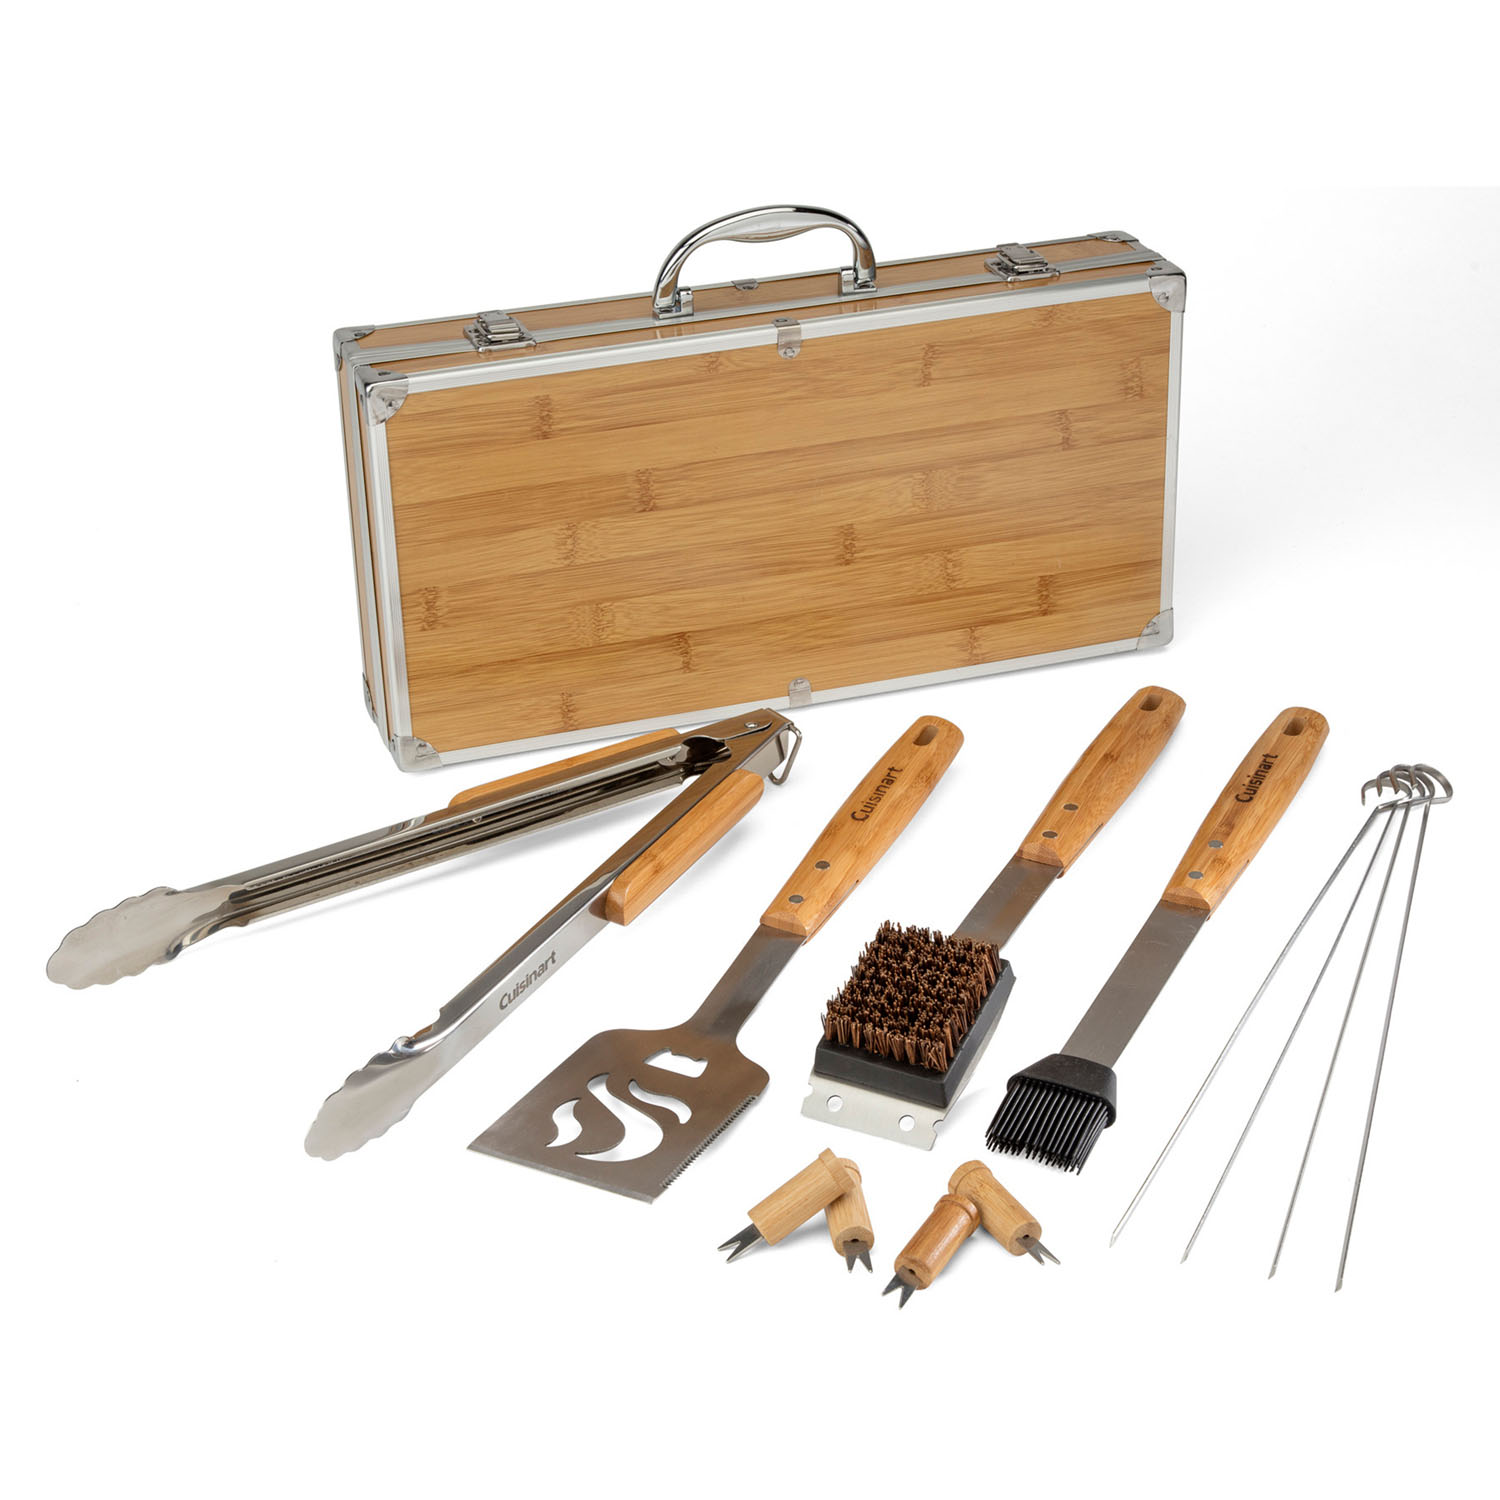 Cuisinart CGS-7014 13 Piece Stainless Steel Grill Tools with Bamboo Handles Set - image 2 of 8